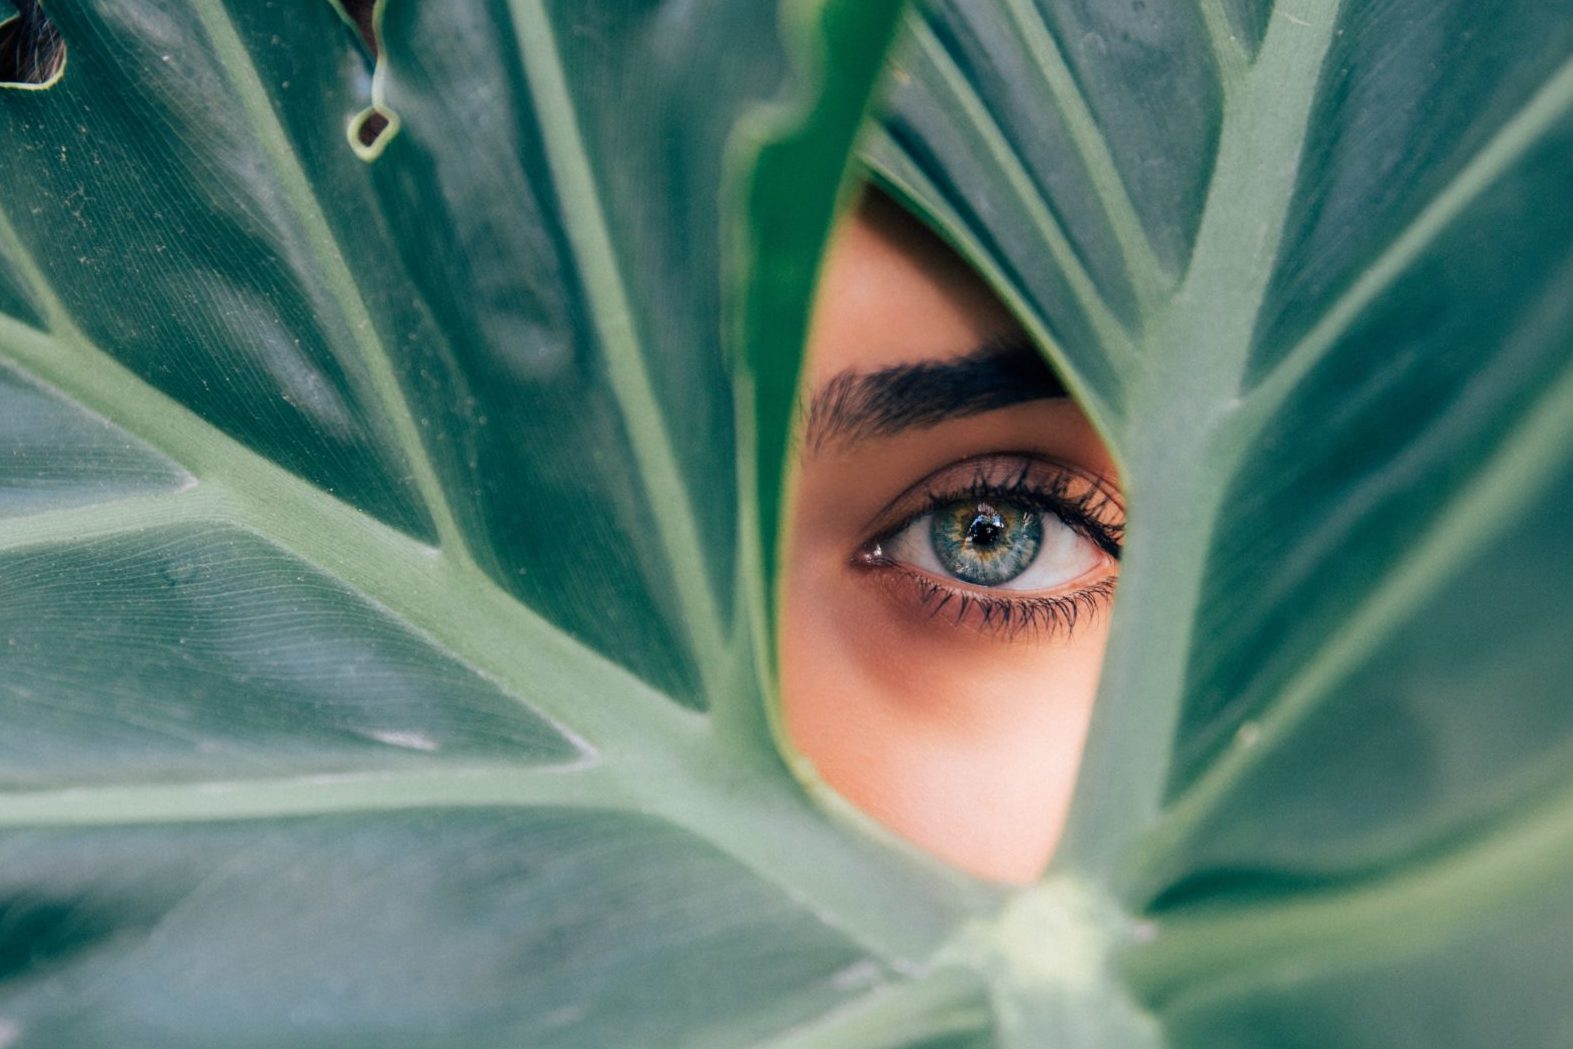 A woman's eye looking through a hole in a giant leaf